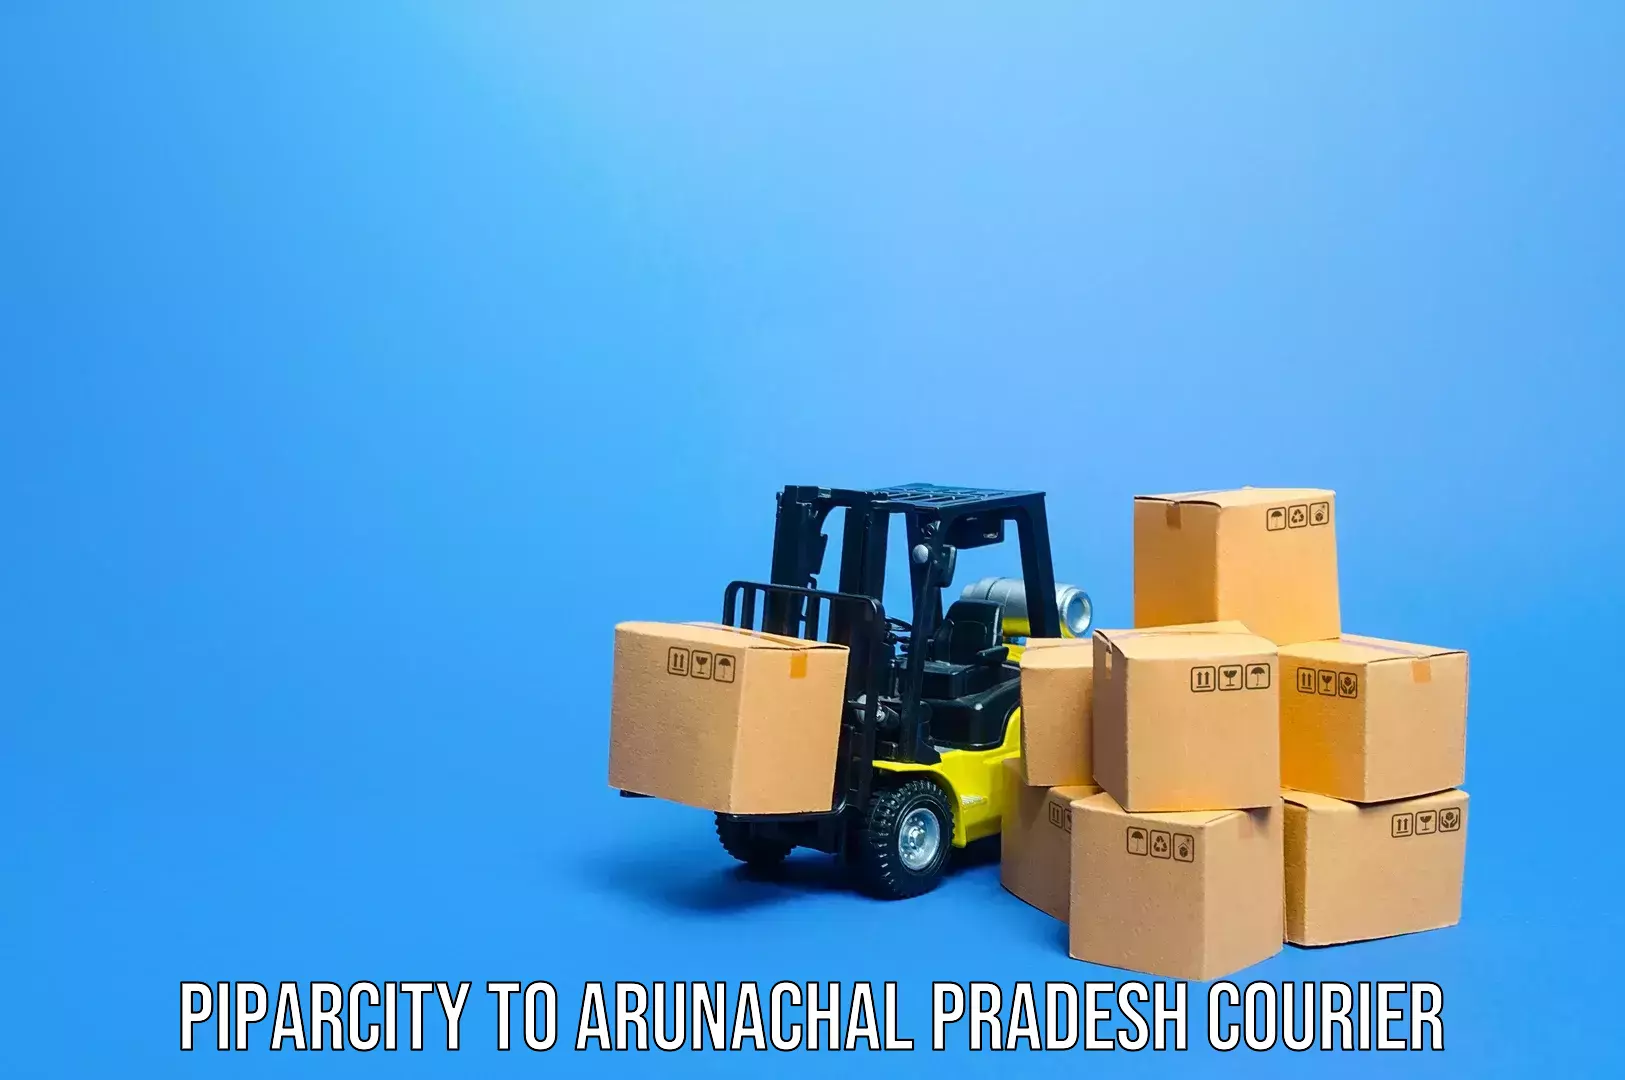 Luggage shipment logistics in Piparcity to Kharsang